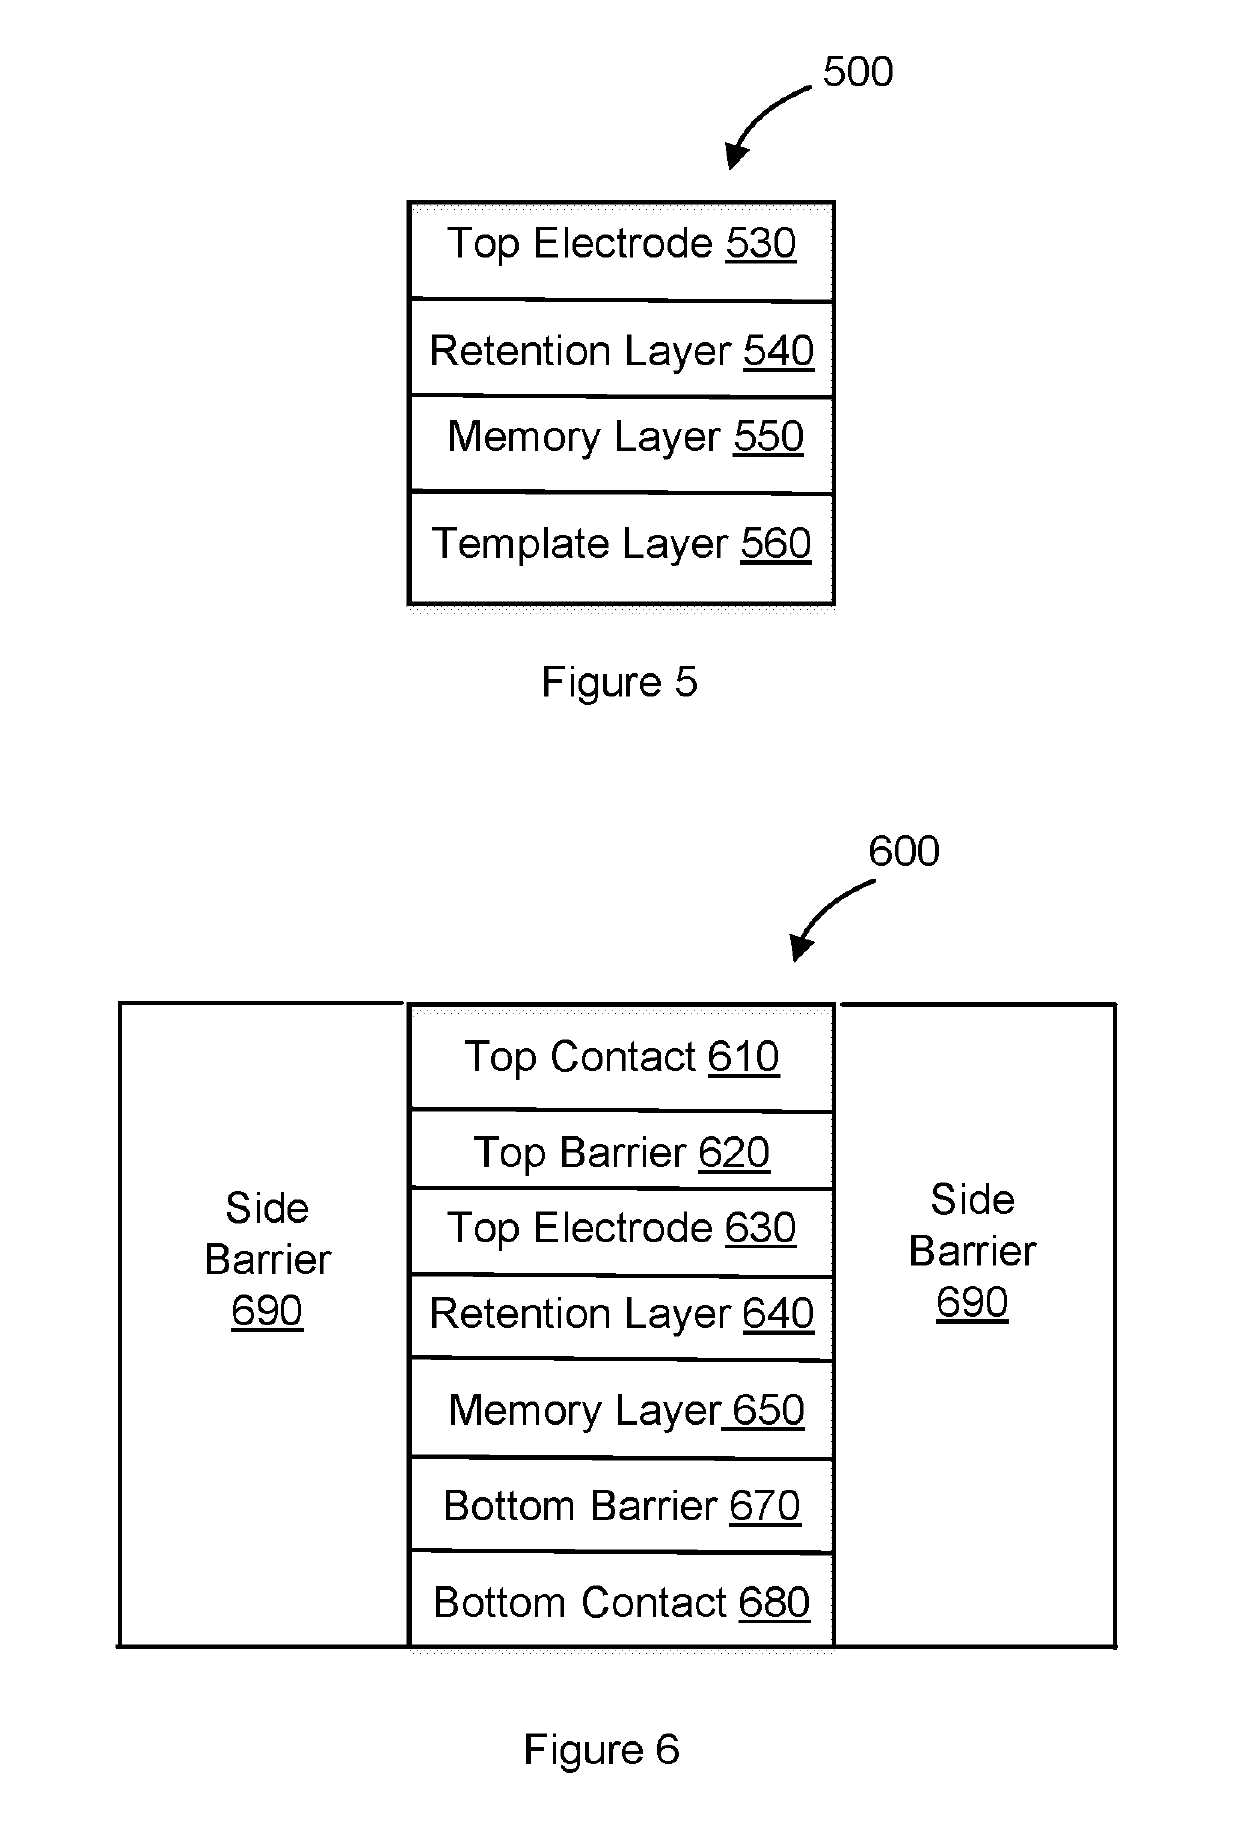 Resistive memory device having a retention layer